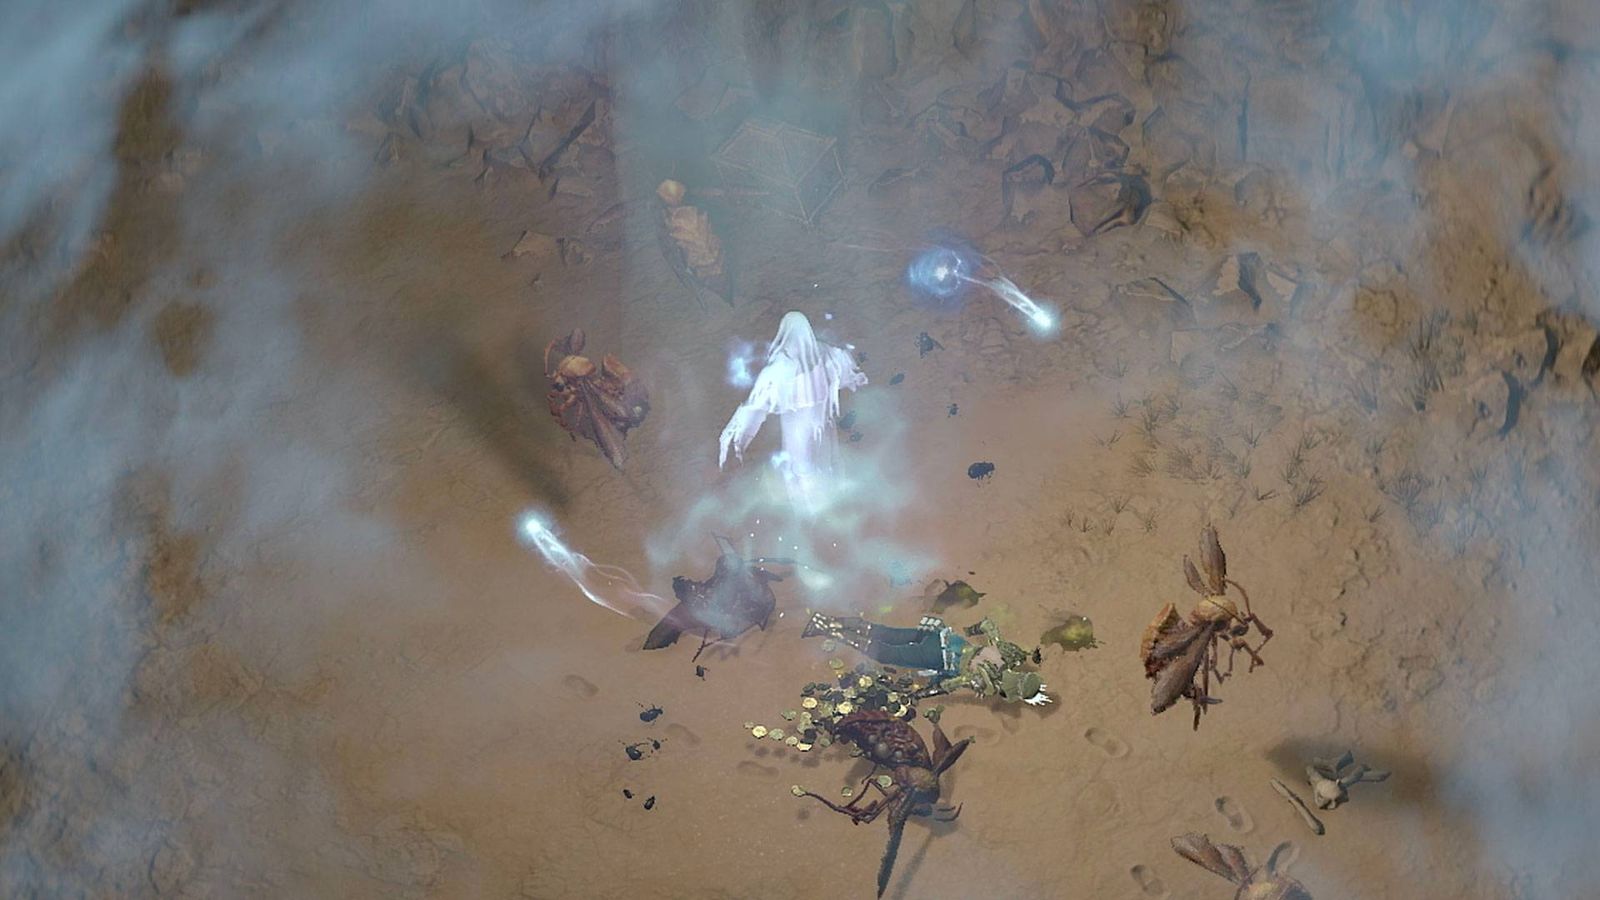 The player character casting a spell in Diablo 4.